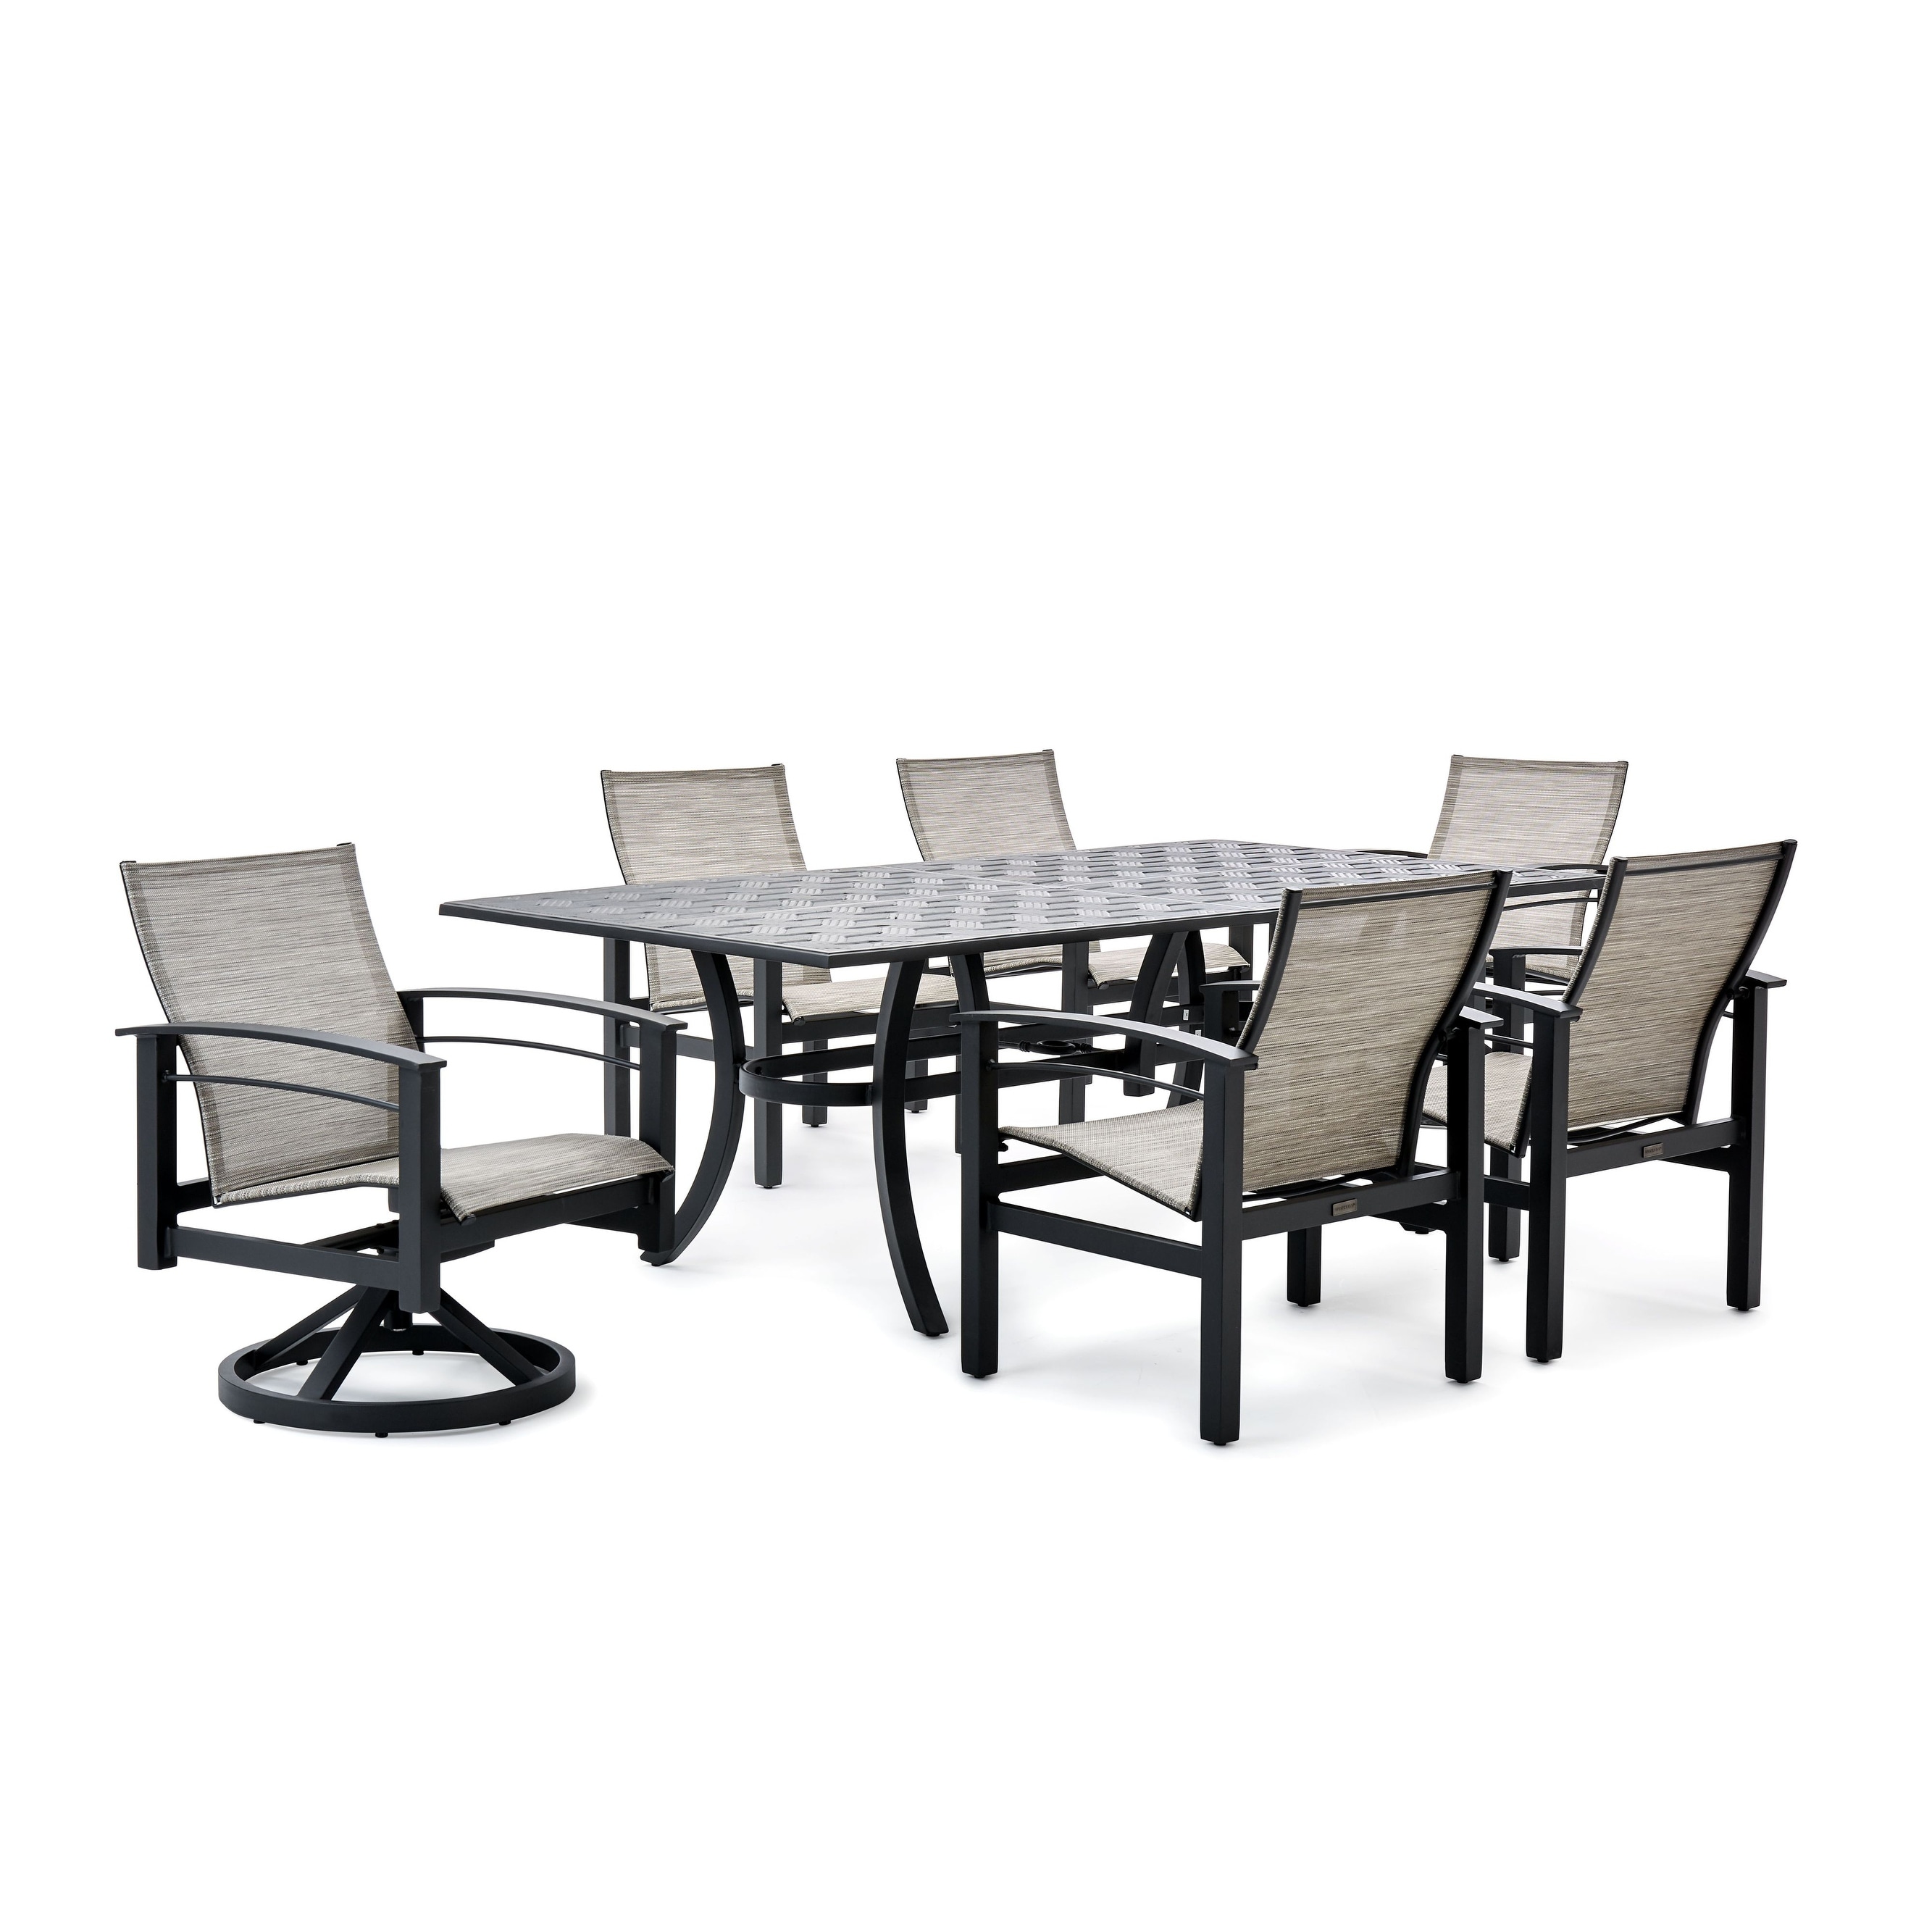 Stanford Sling 7pc Dining Set (4 Chairs  2 Swivel Chairs  Table)